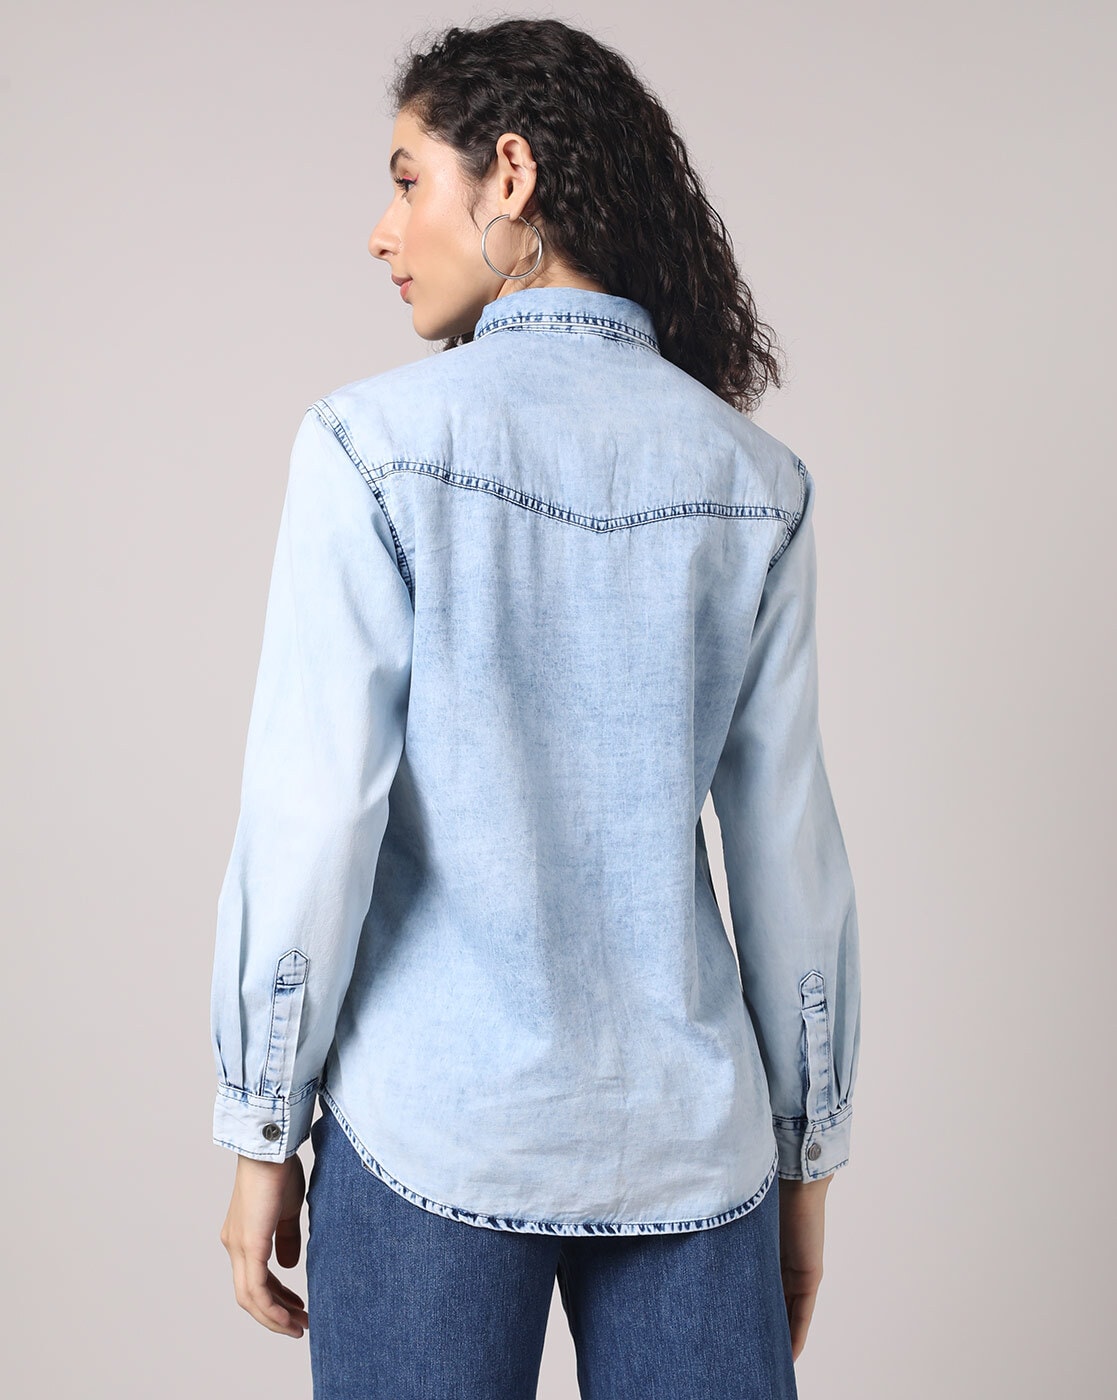 Buy The Souled Store Women Denim Shirt: Washed Blue Solid Shirts at  Amazon.in